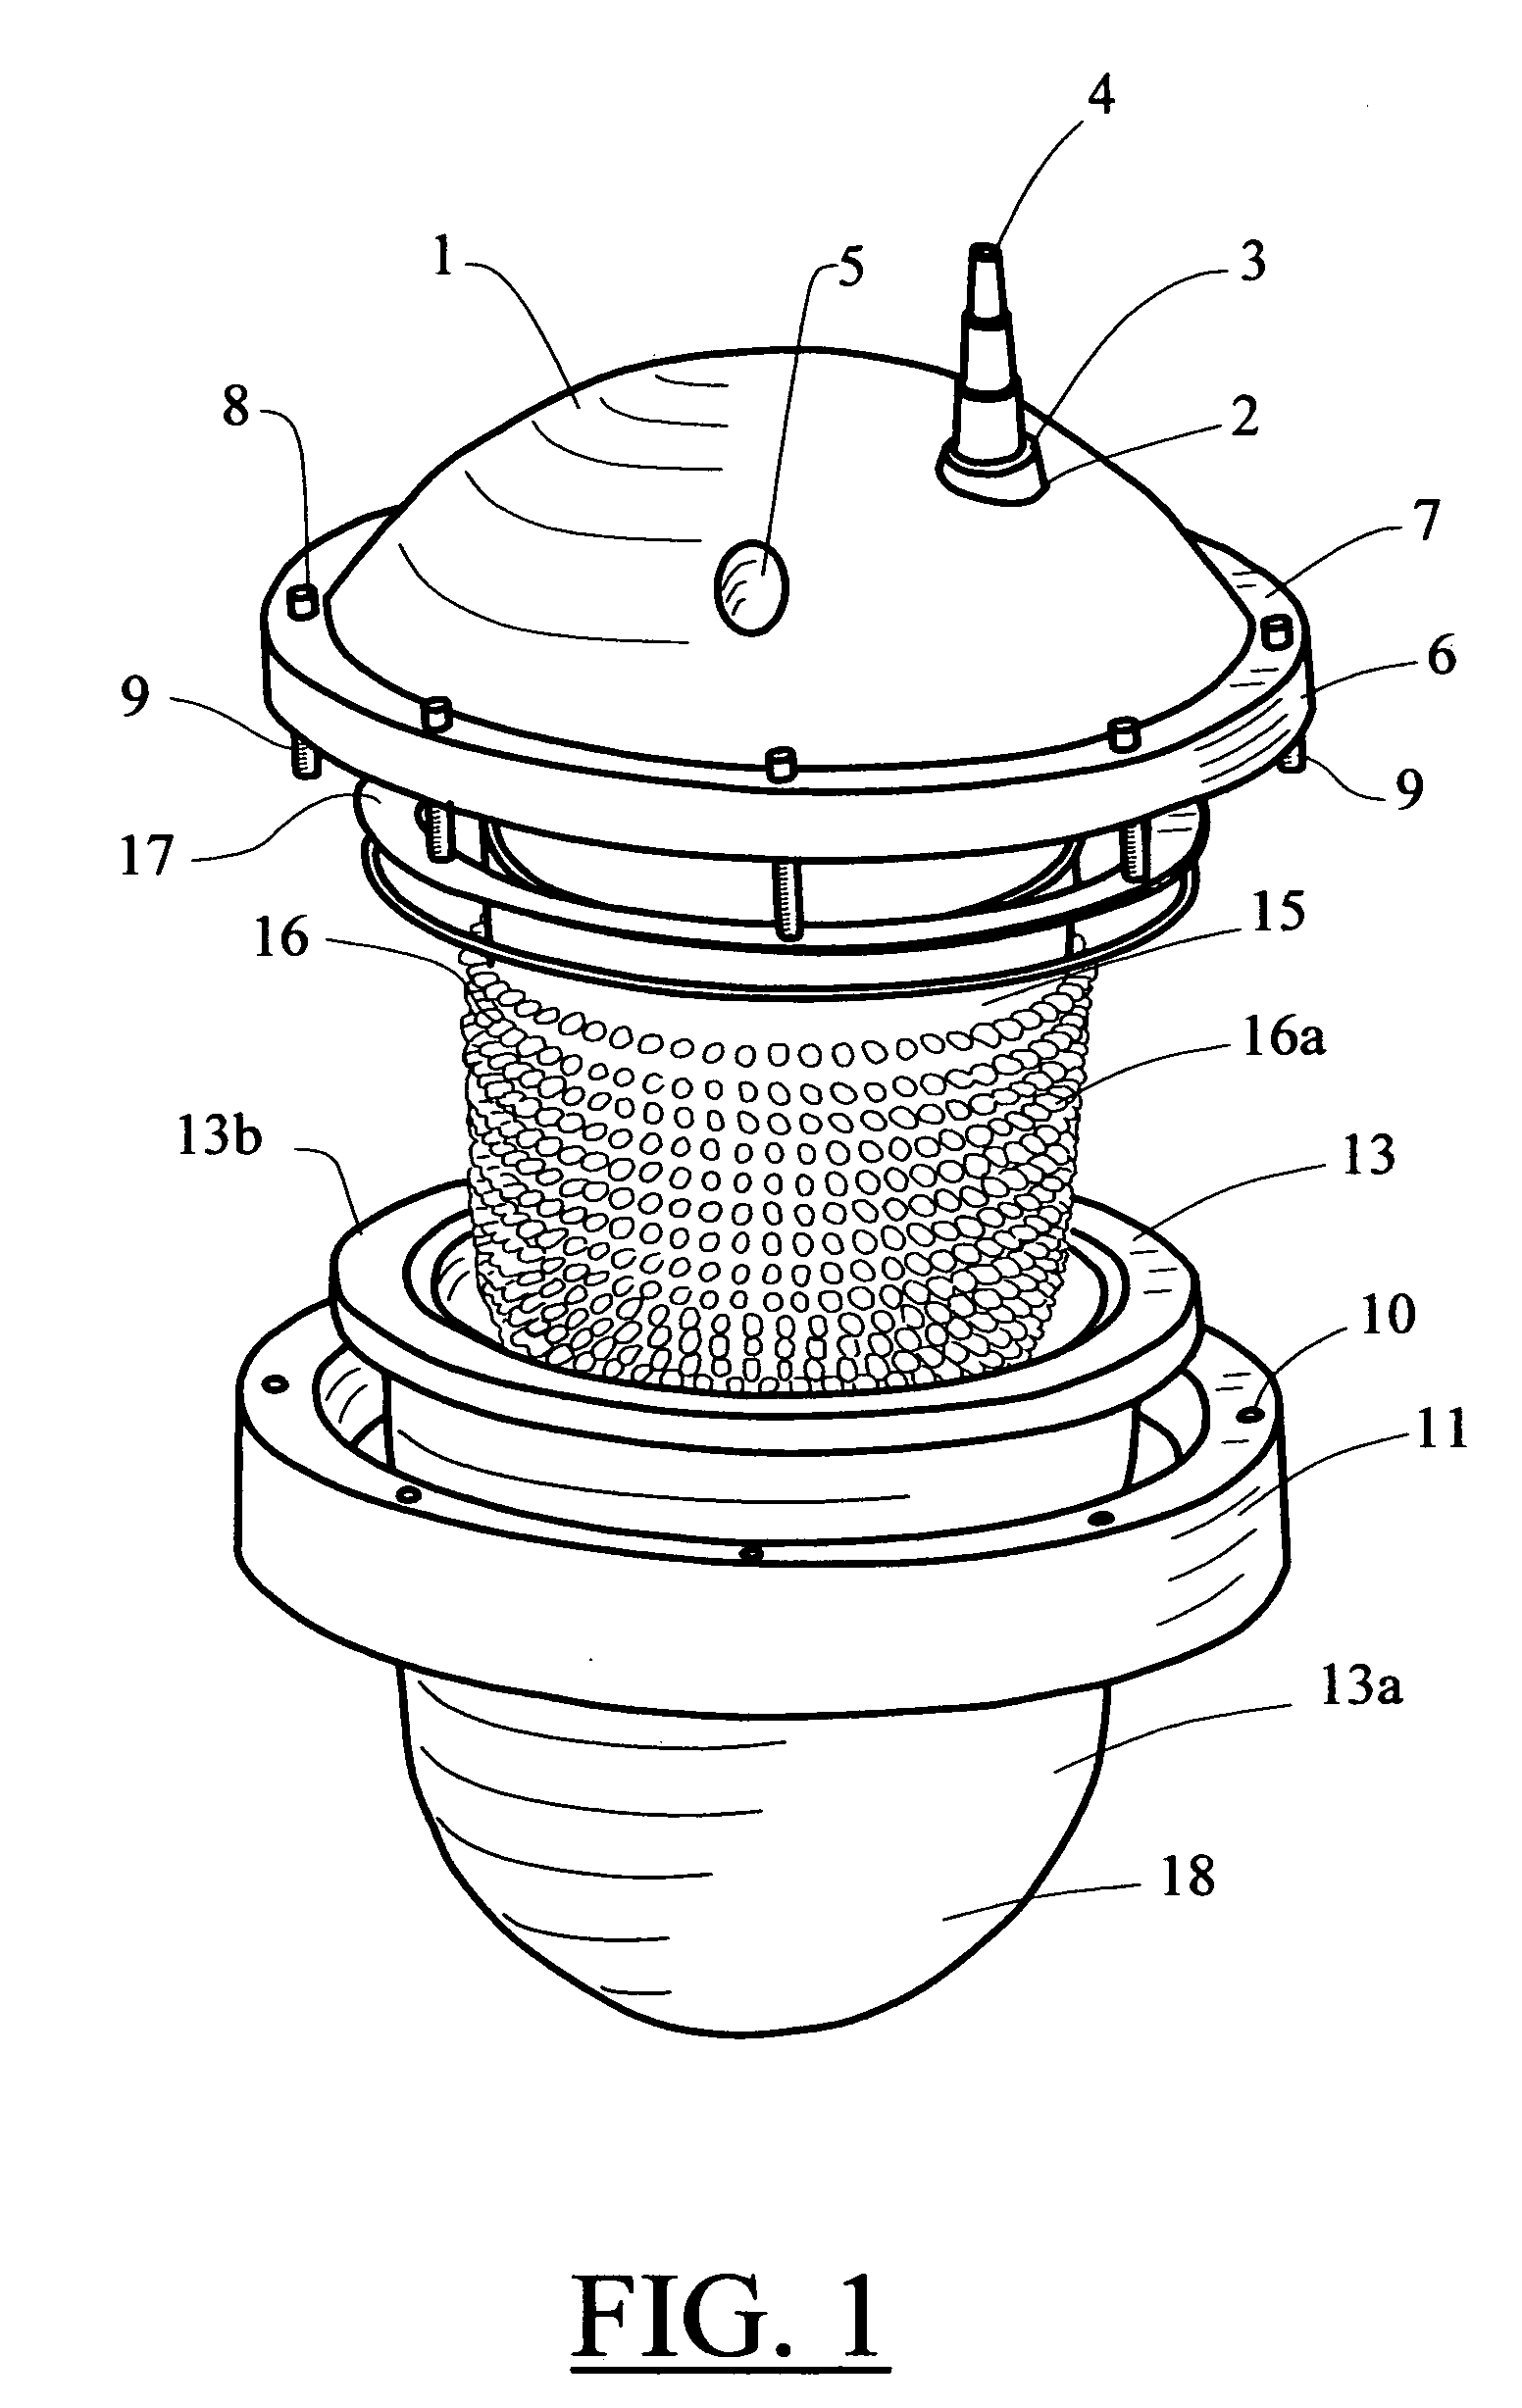 Submersible lamp for use in fotoperiod in processes of handling of salmon species